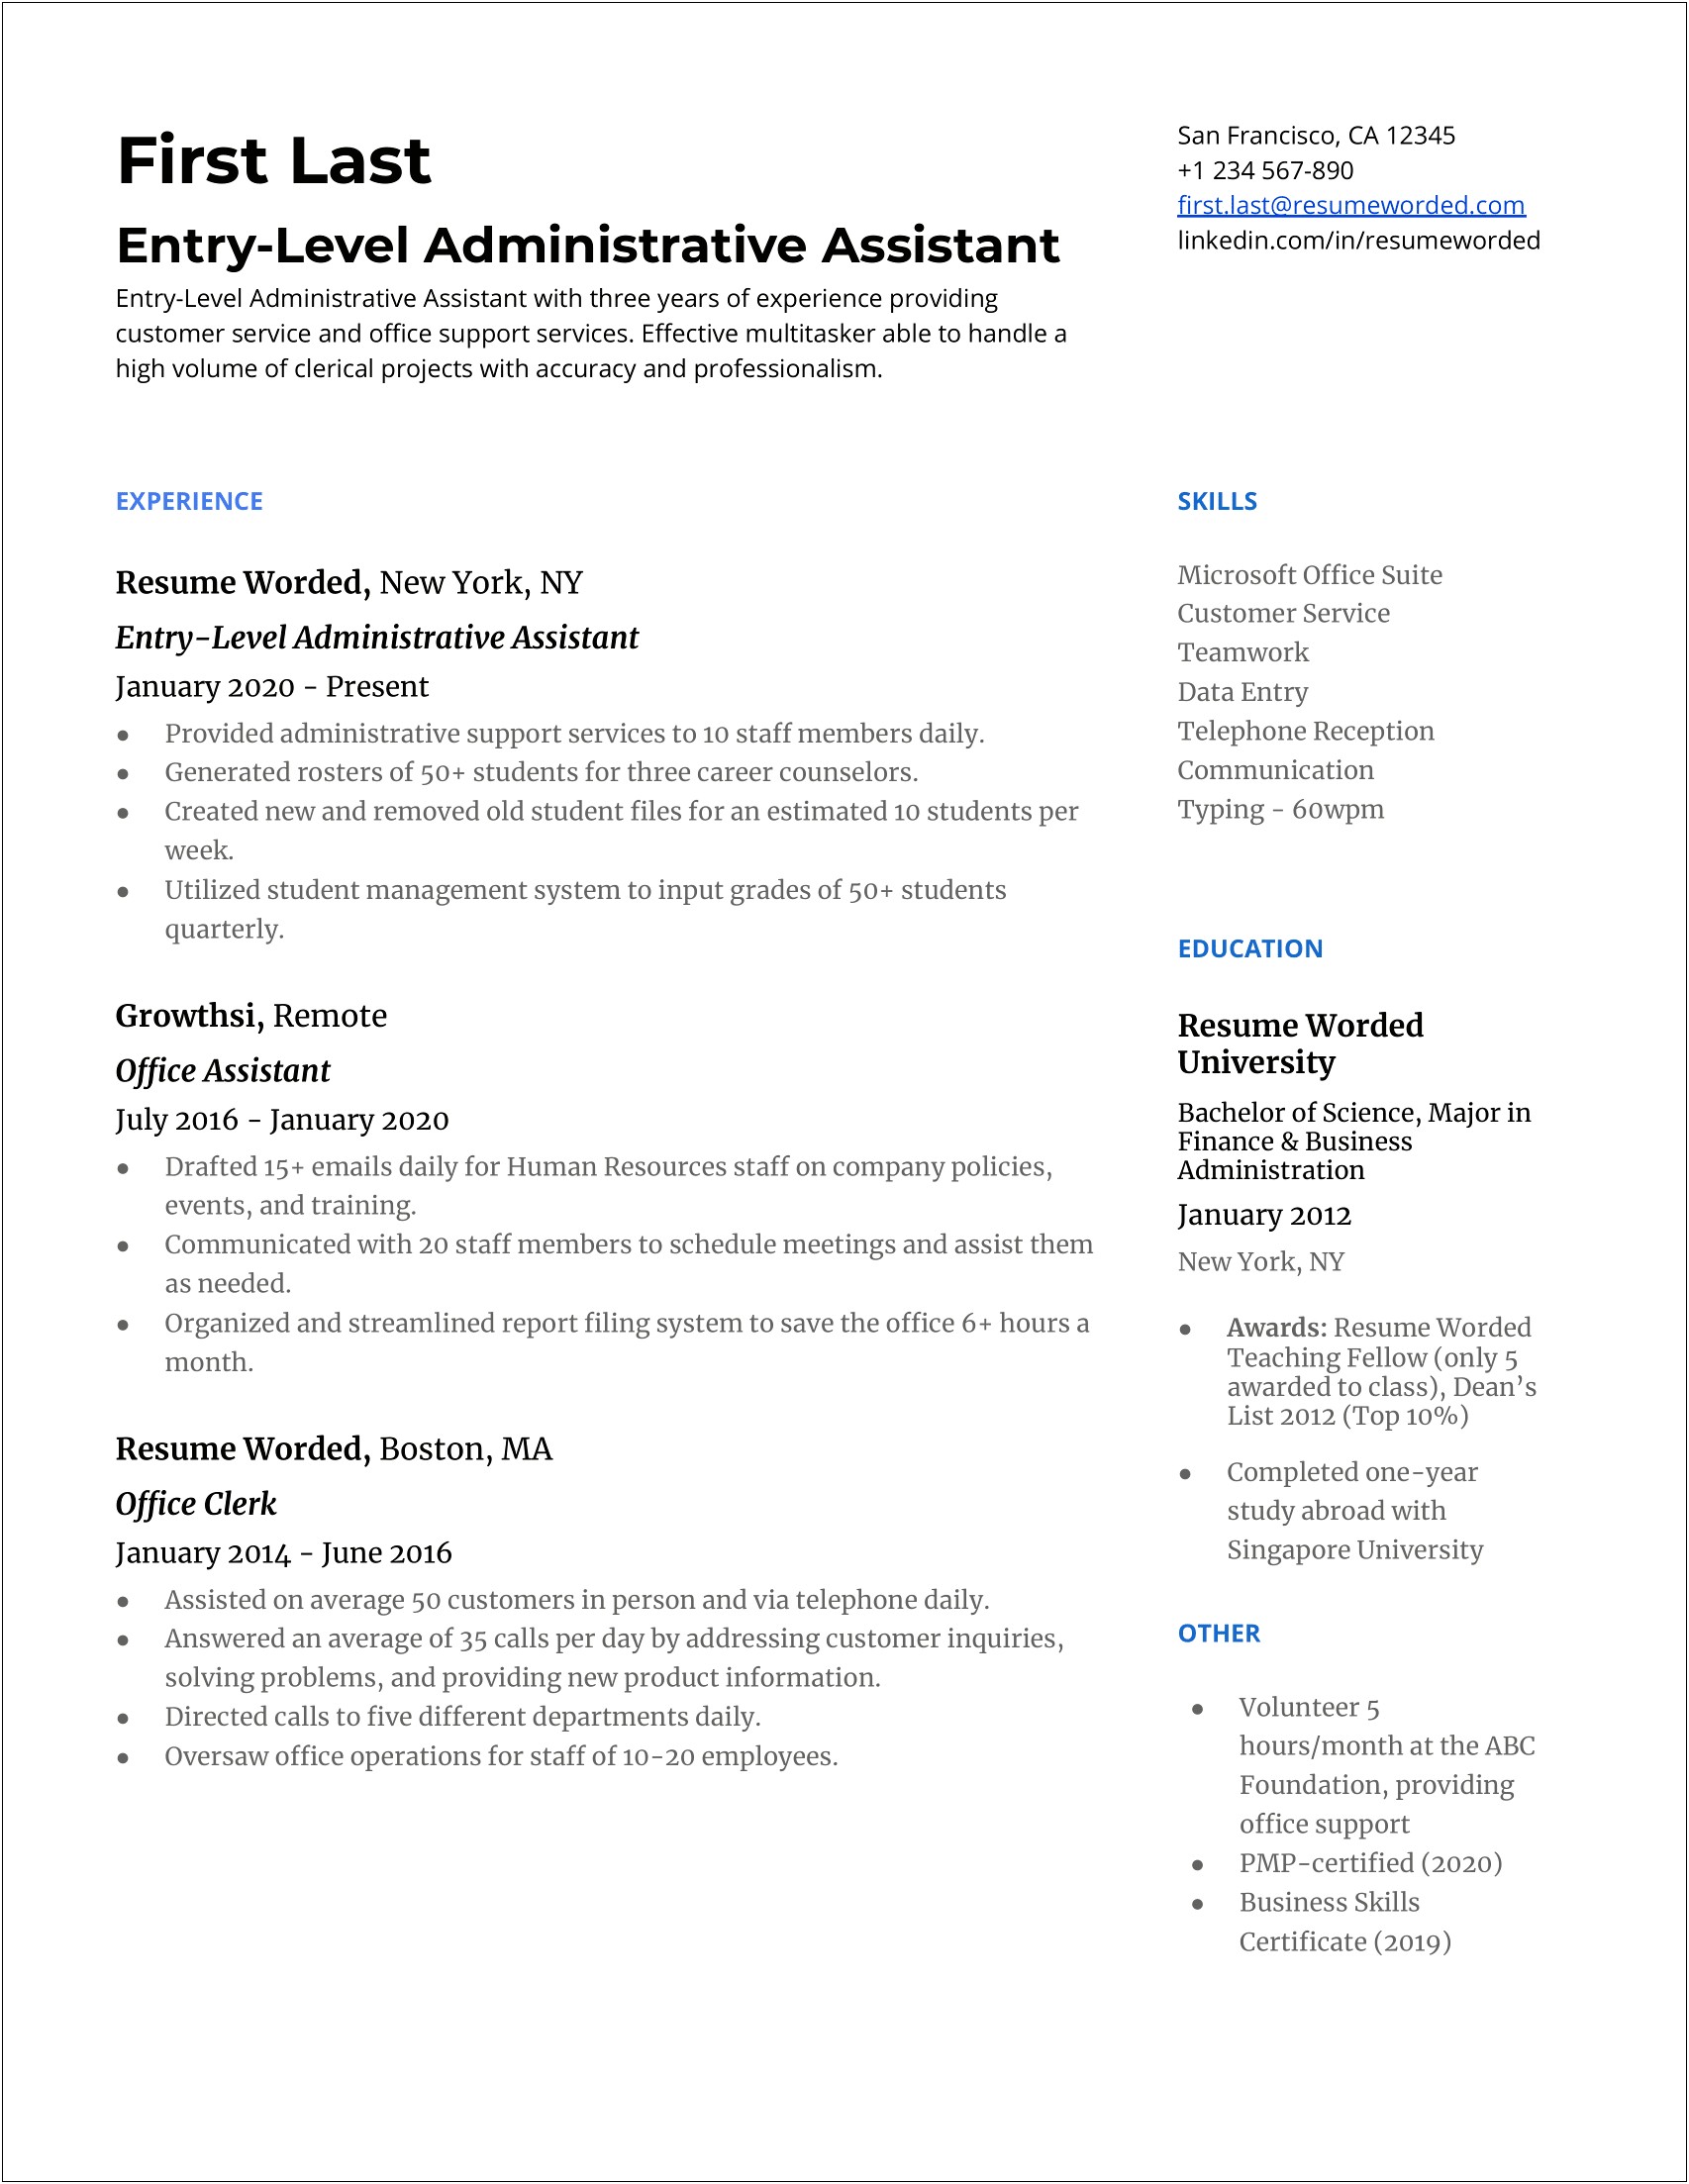 General Resume Objective Examples For Administrative Assistant